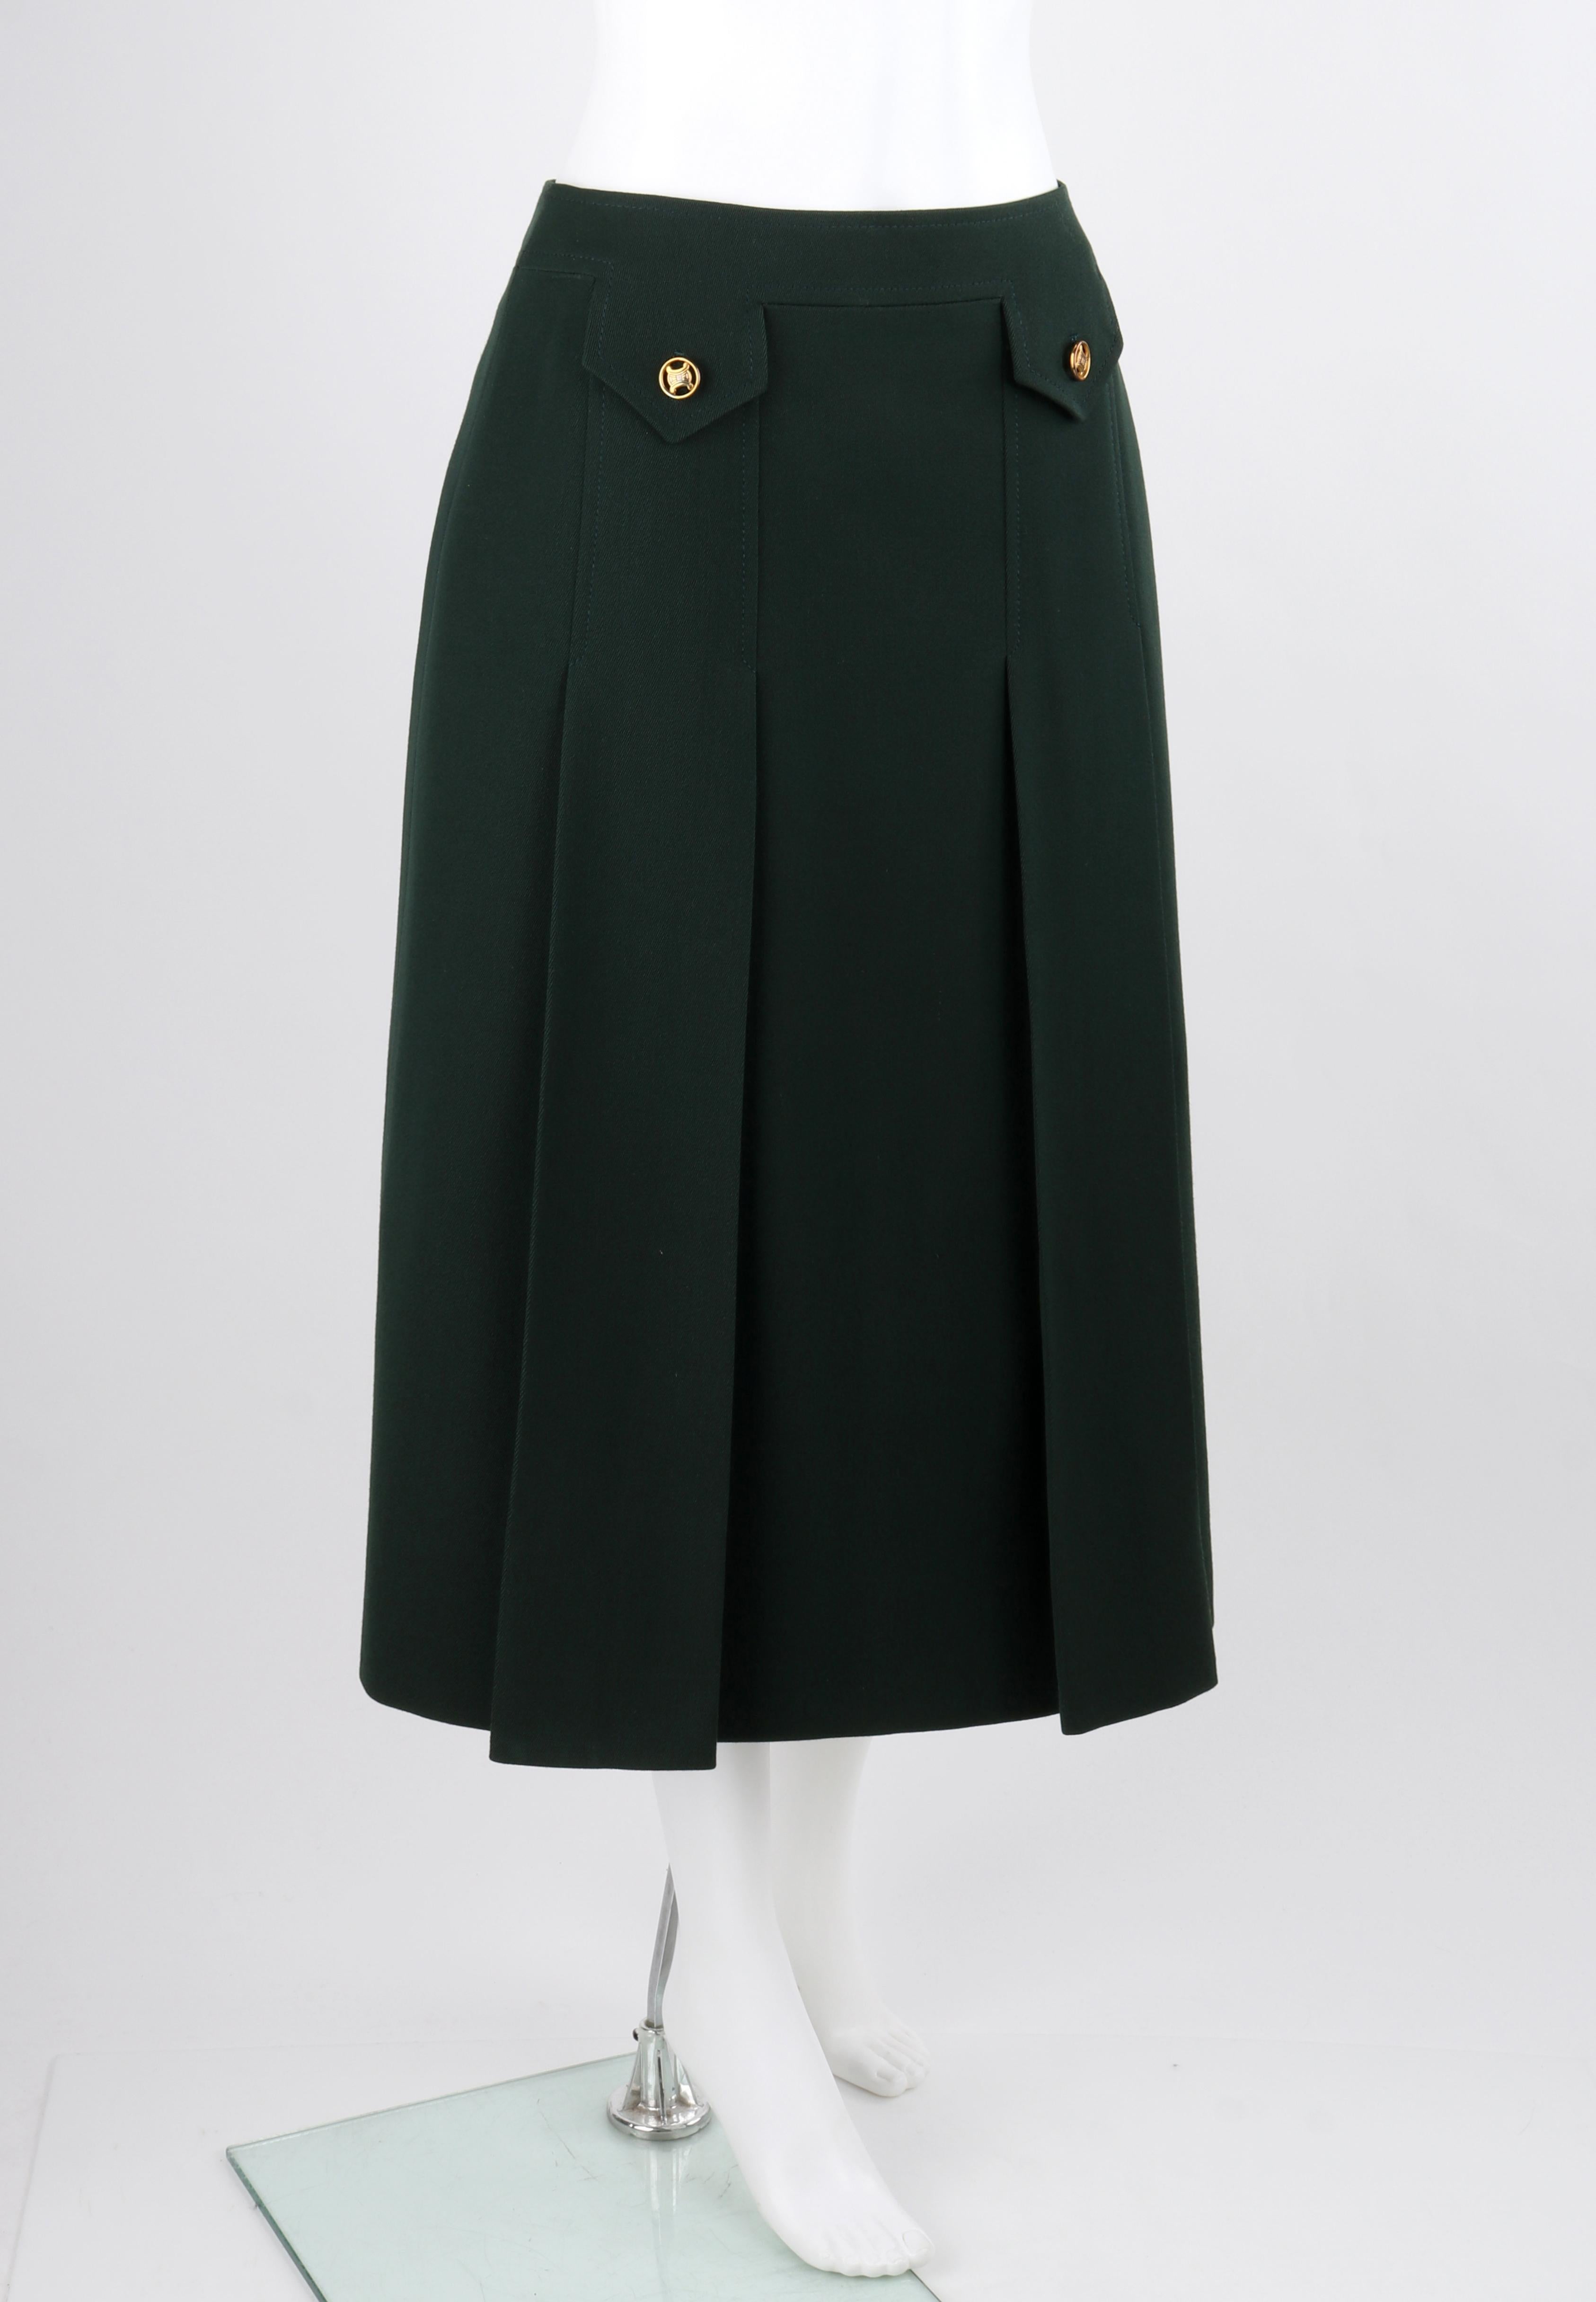 CELINE PARIS c.1970's Forest Green Wool Box Pleated A Line Midi Skirt

Brand / Manufacturer: Celine Paris
Circa: 1970's
Designer: Celine Vipiana
Style: A Line Skirt
Color(s): Forest green, Gold
Lined: Yes
Marked Fabric: 100% Laine Wool
Unmarked